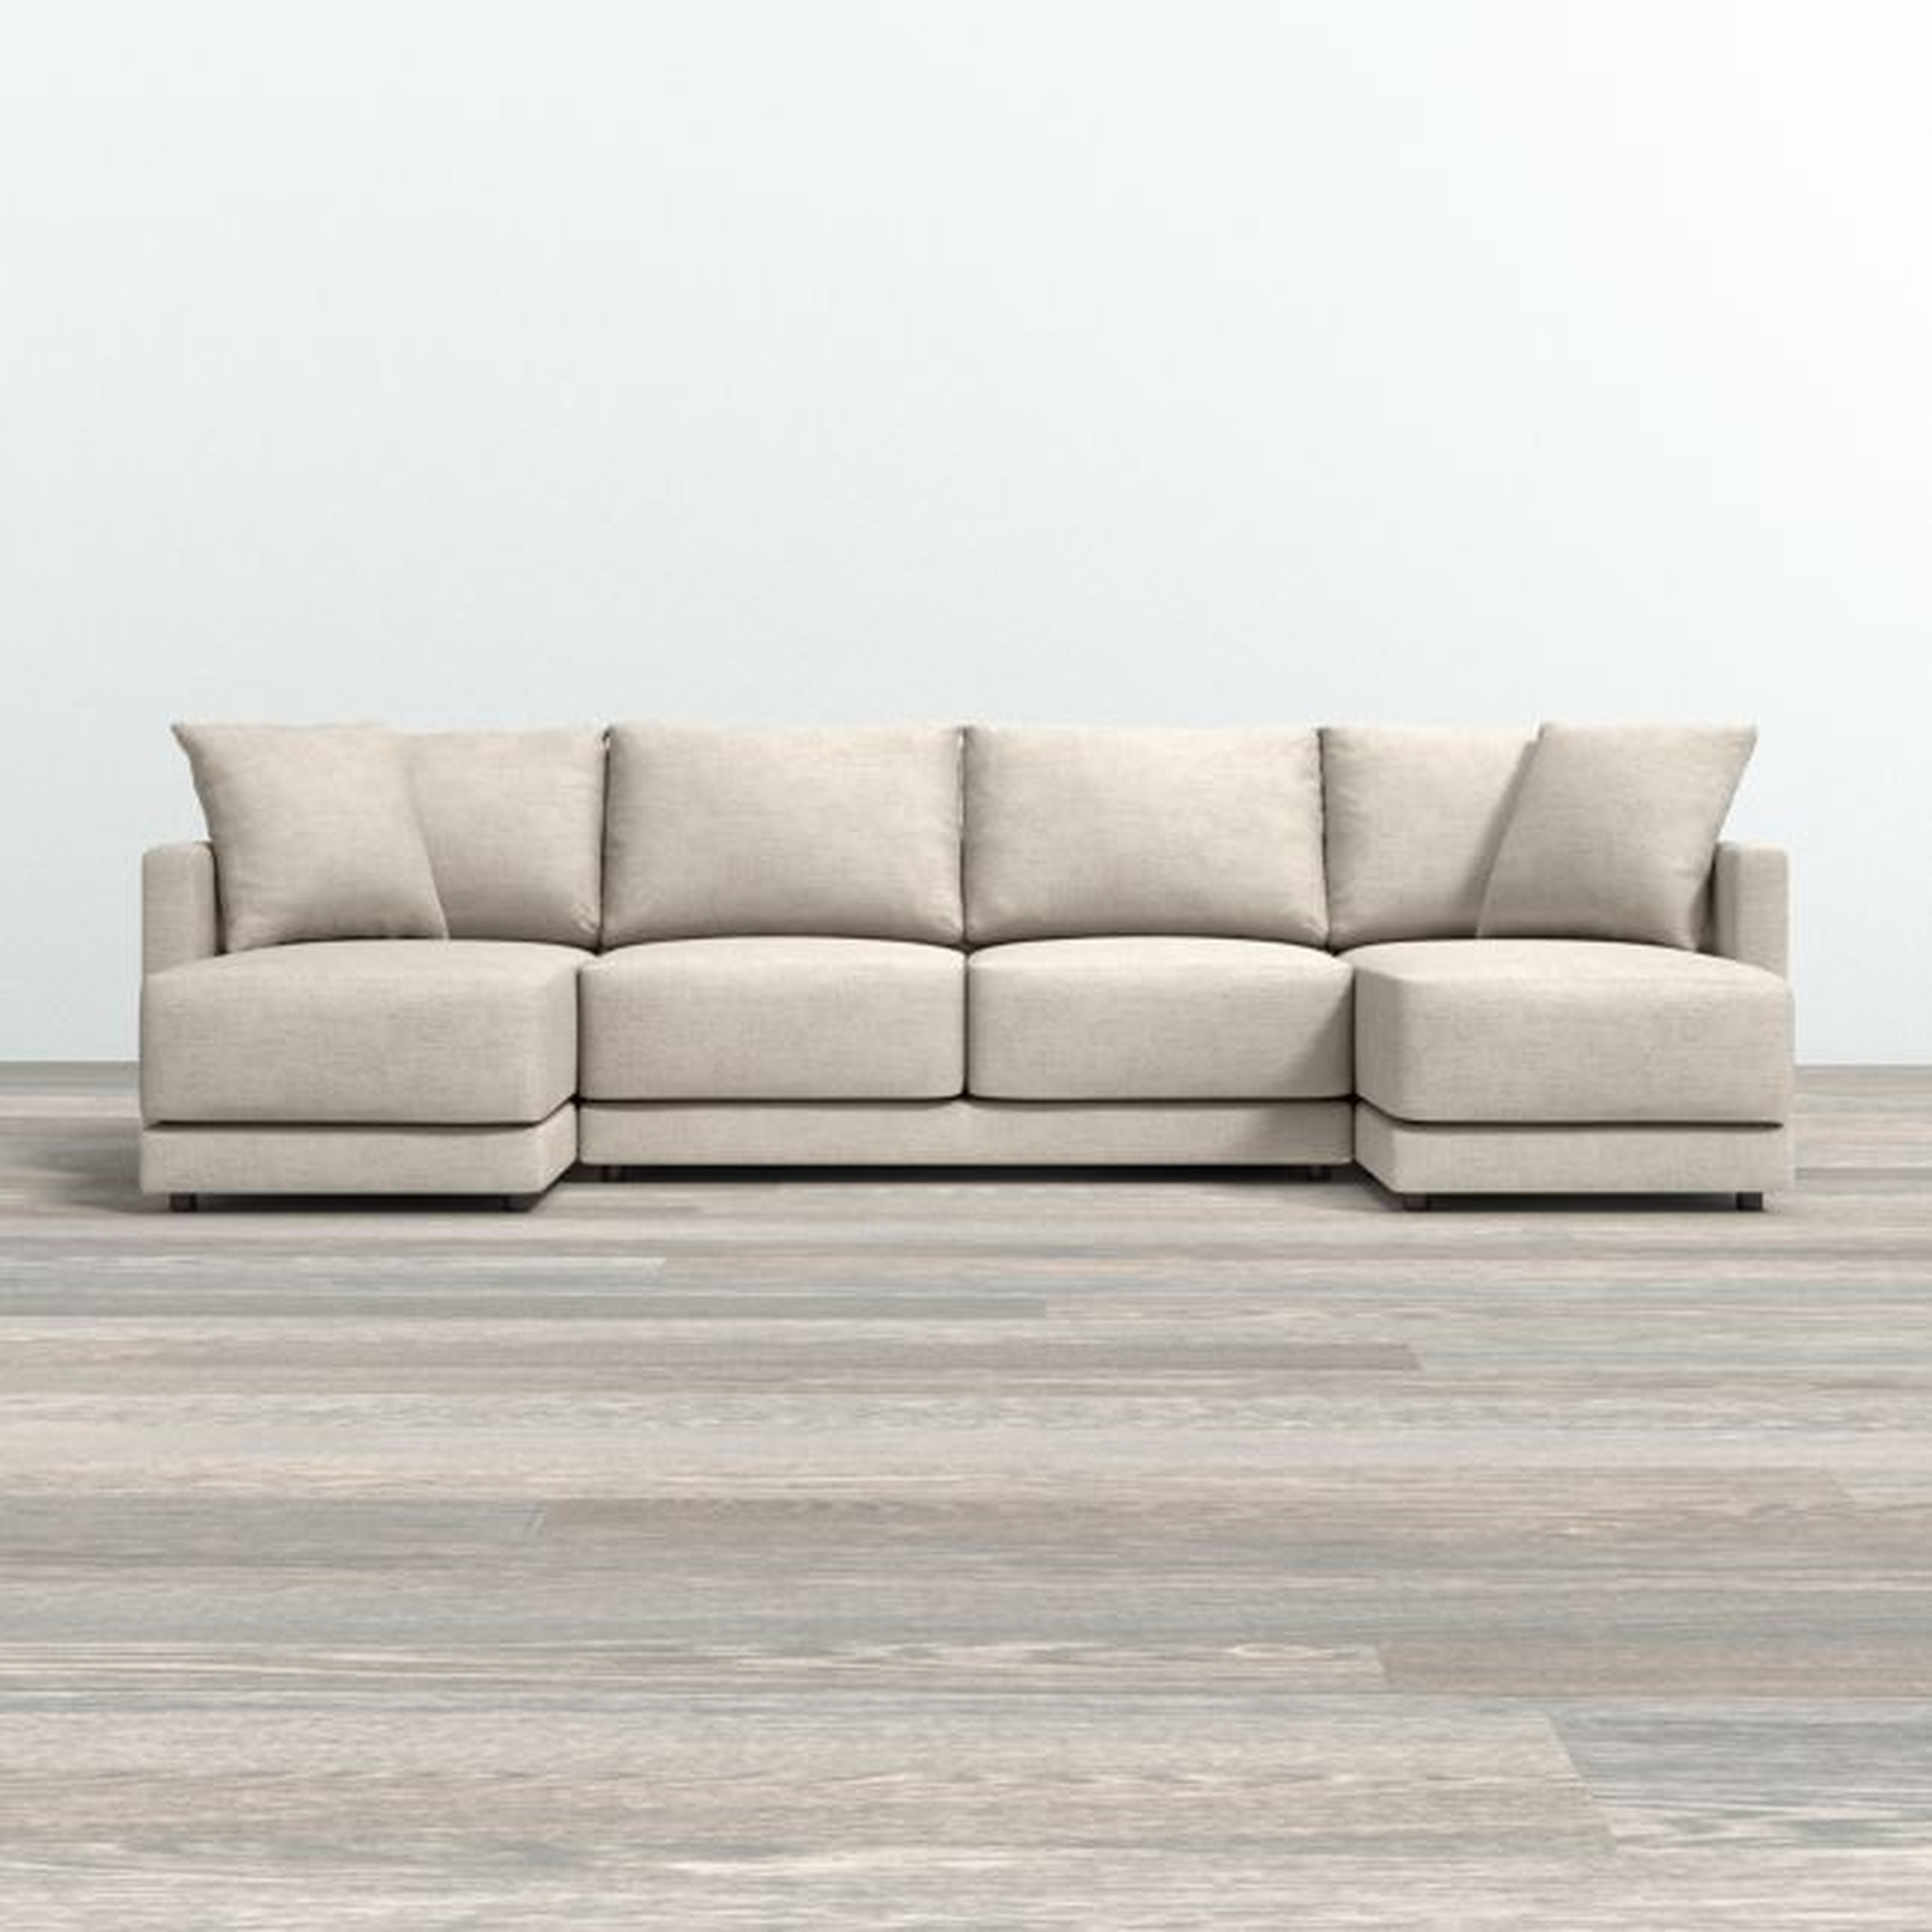 Gather 3-Piece Sectional Sofa - Crate and Barrel